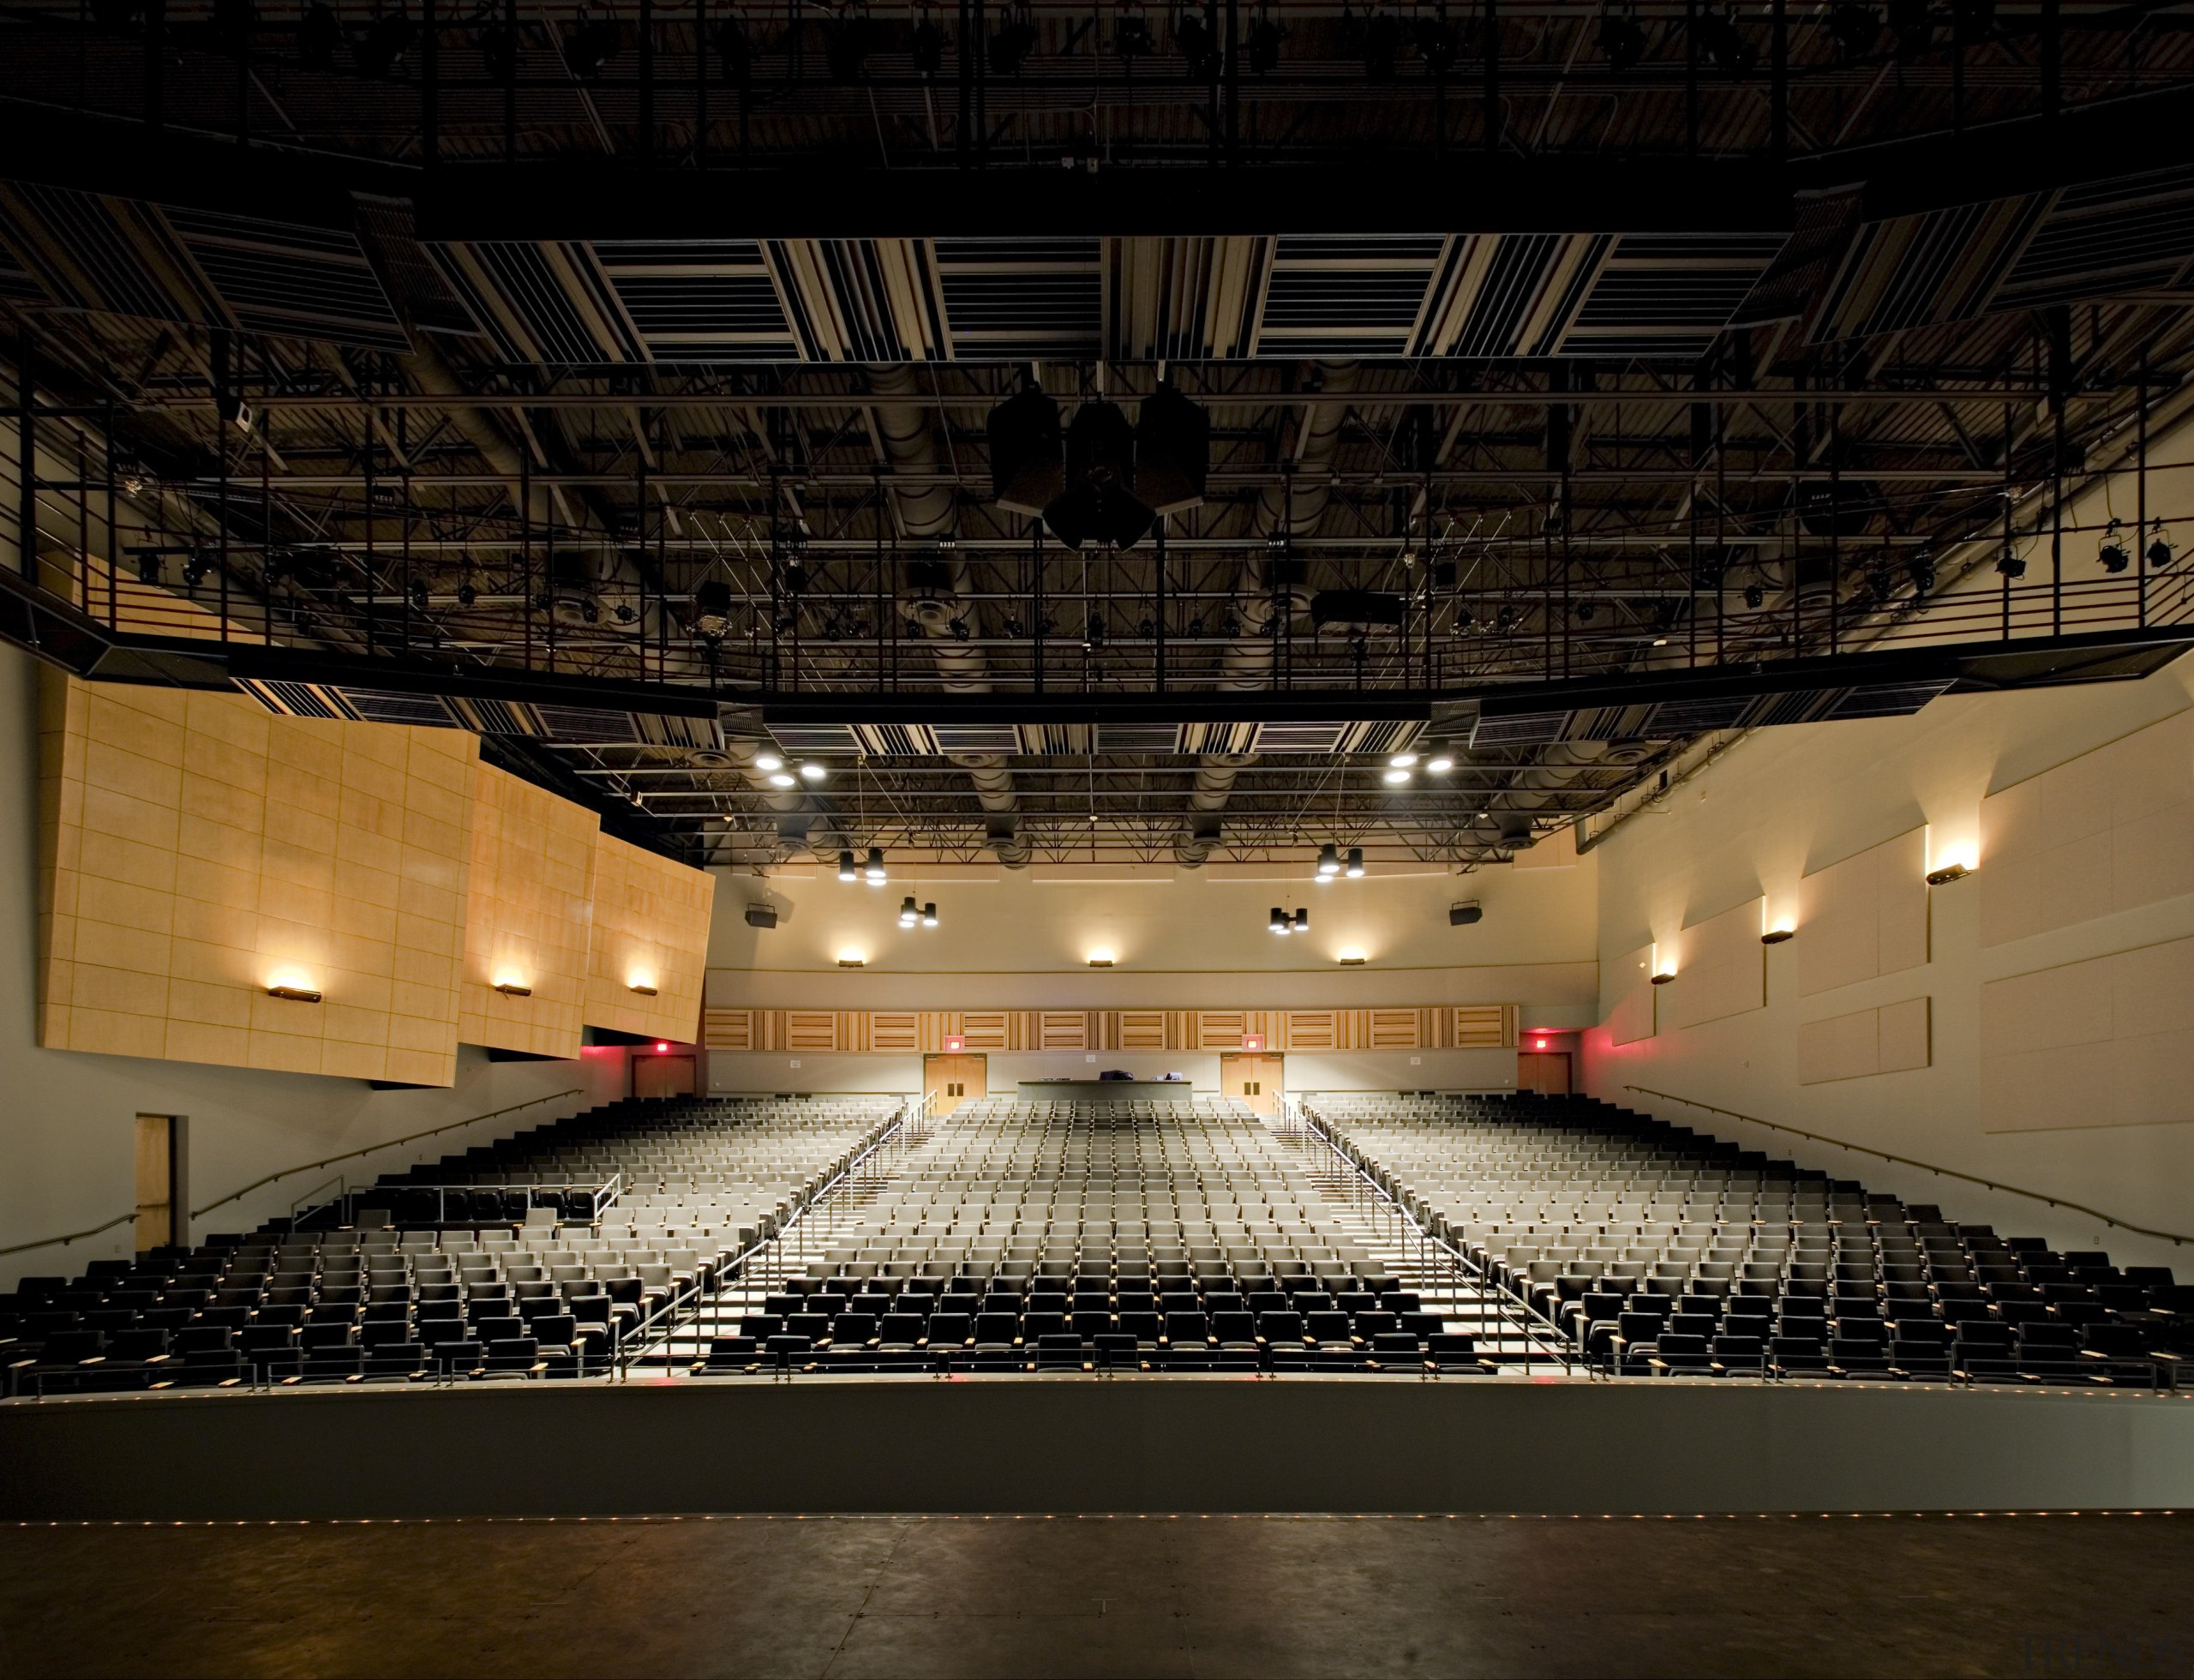 View of the auditorium which has more subdued architecture, auditorium, darkness, light, lighting, night, performing arts center, structure, theatre, black, brown